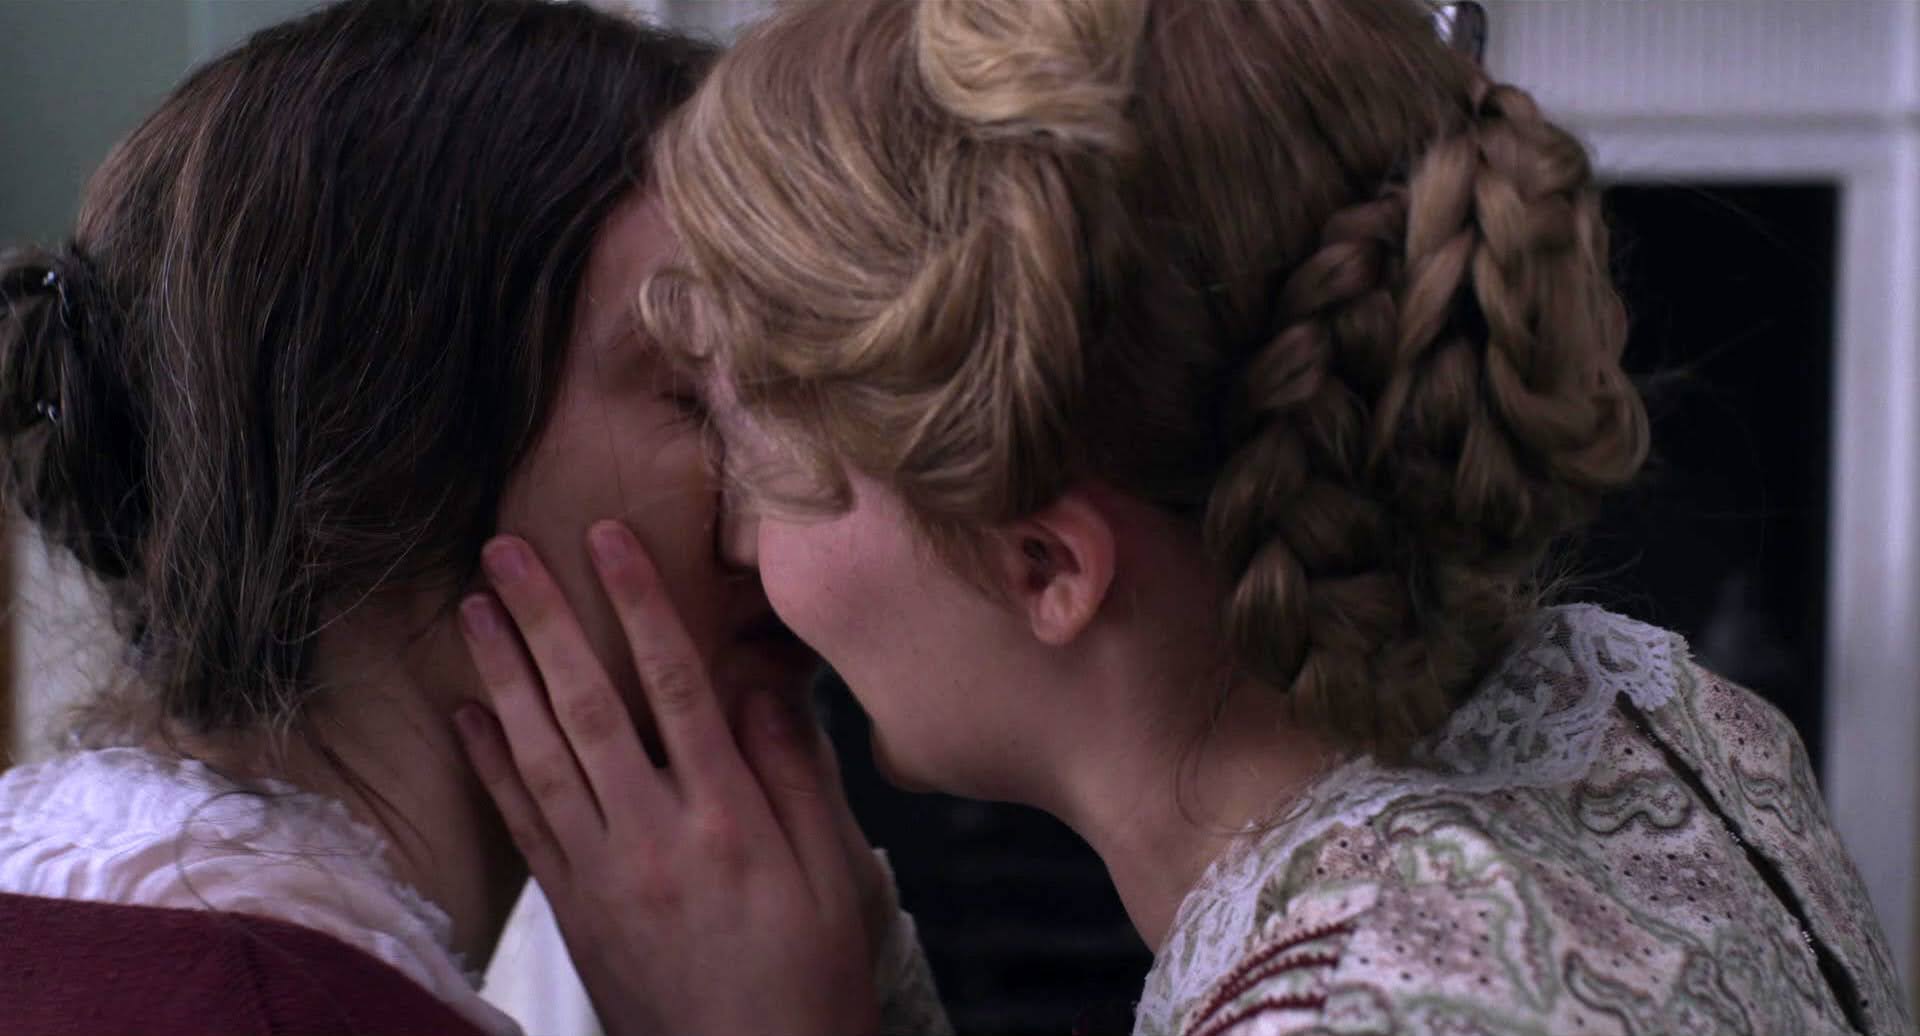 Henry and charlotte kissing